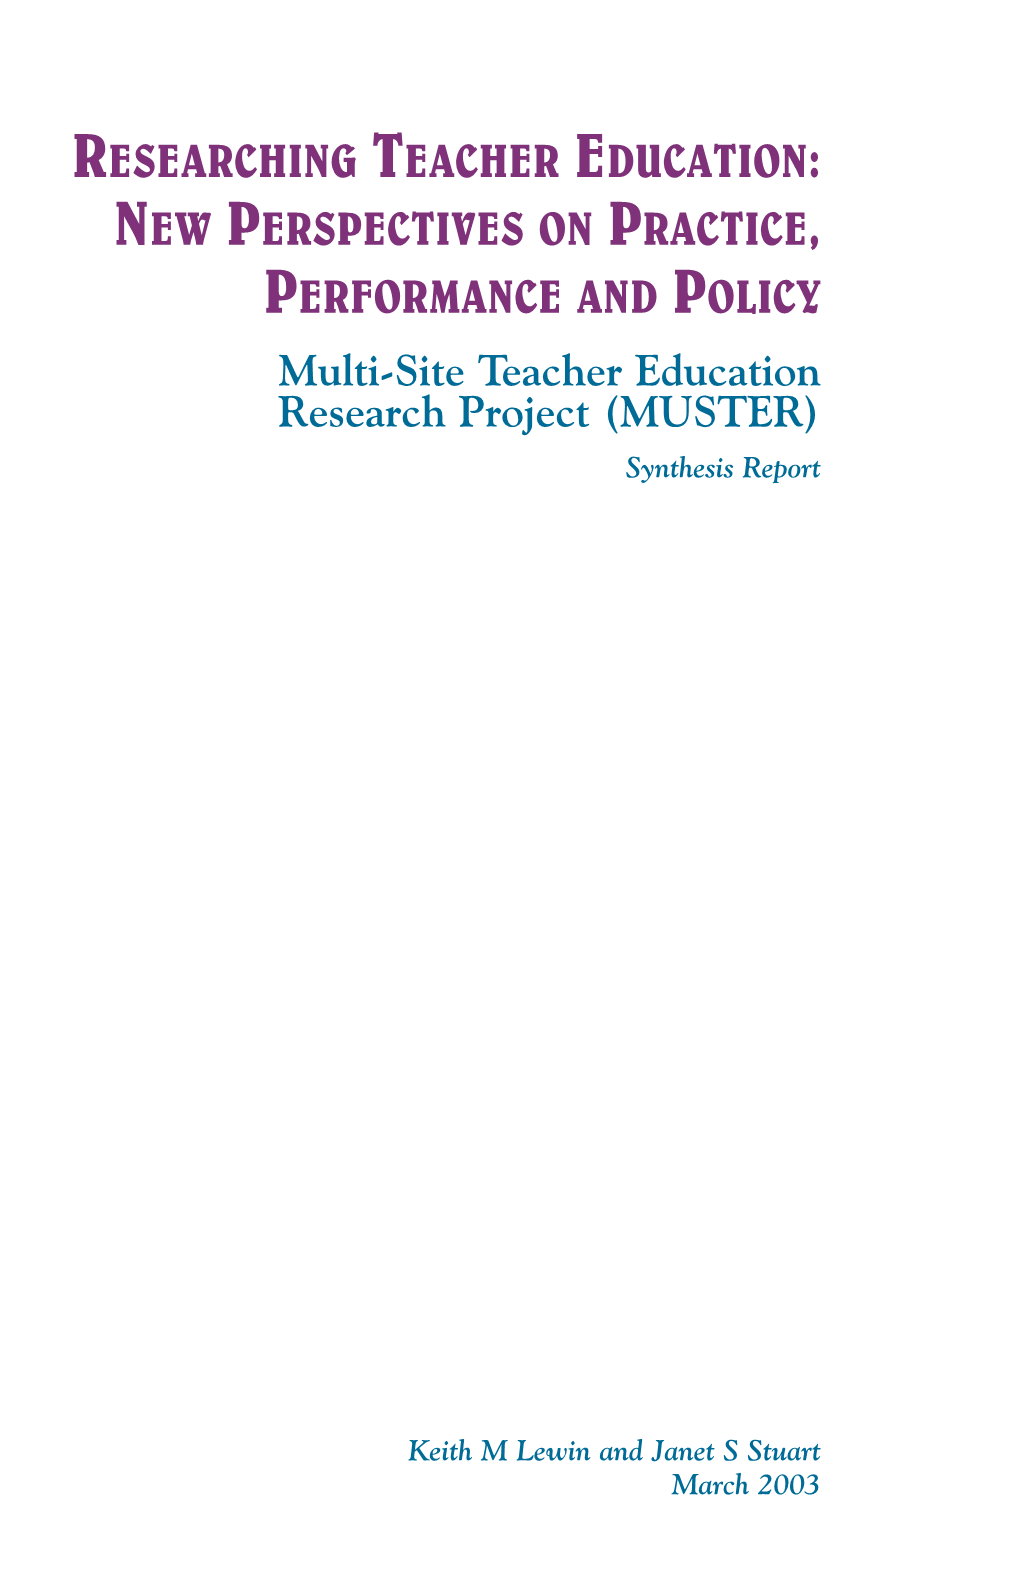 RESEARCHING TEACHER EDUCATION: NEW PERSPECTIVES on PRACTICE, PERFORMANCE and POLICY Multi-Site Teacher Education Research Project (MUSTER) Synthesis Report